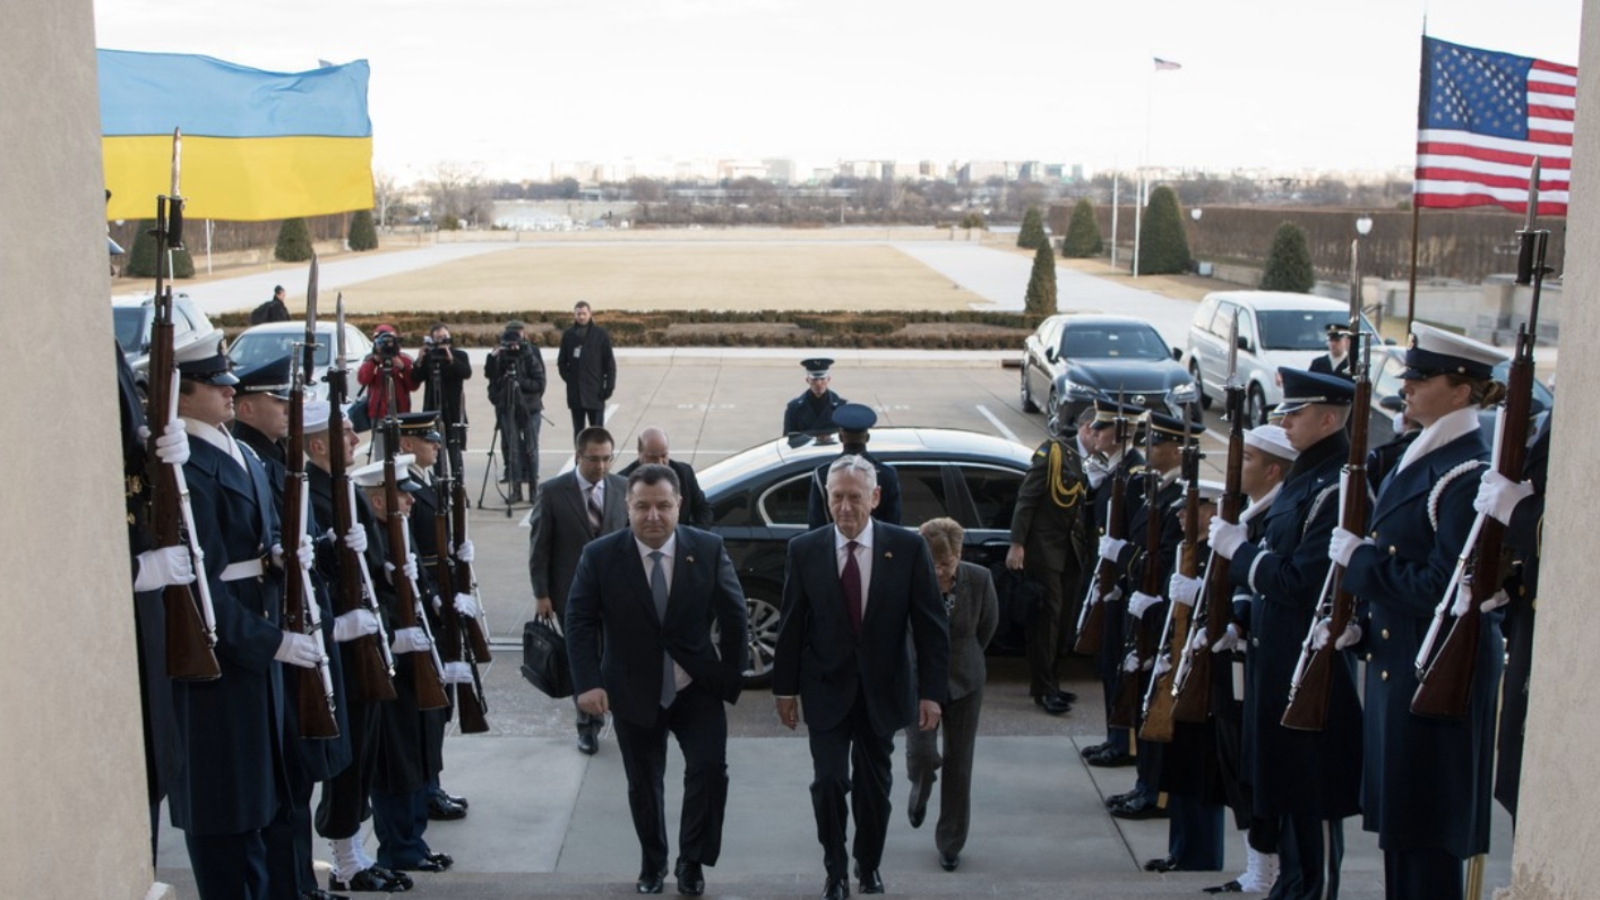 The U.S. and Ukranian Defense Secretaries walk up a set of stairs flanked by a row of U.S. soldiers.